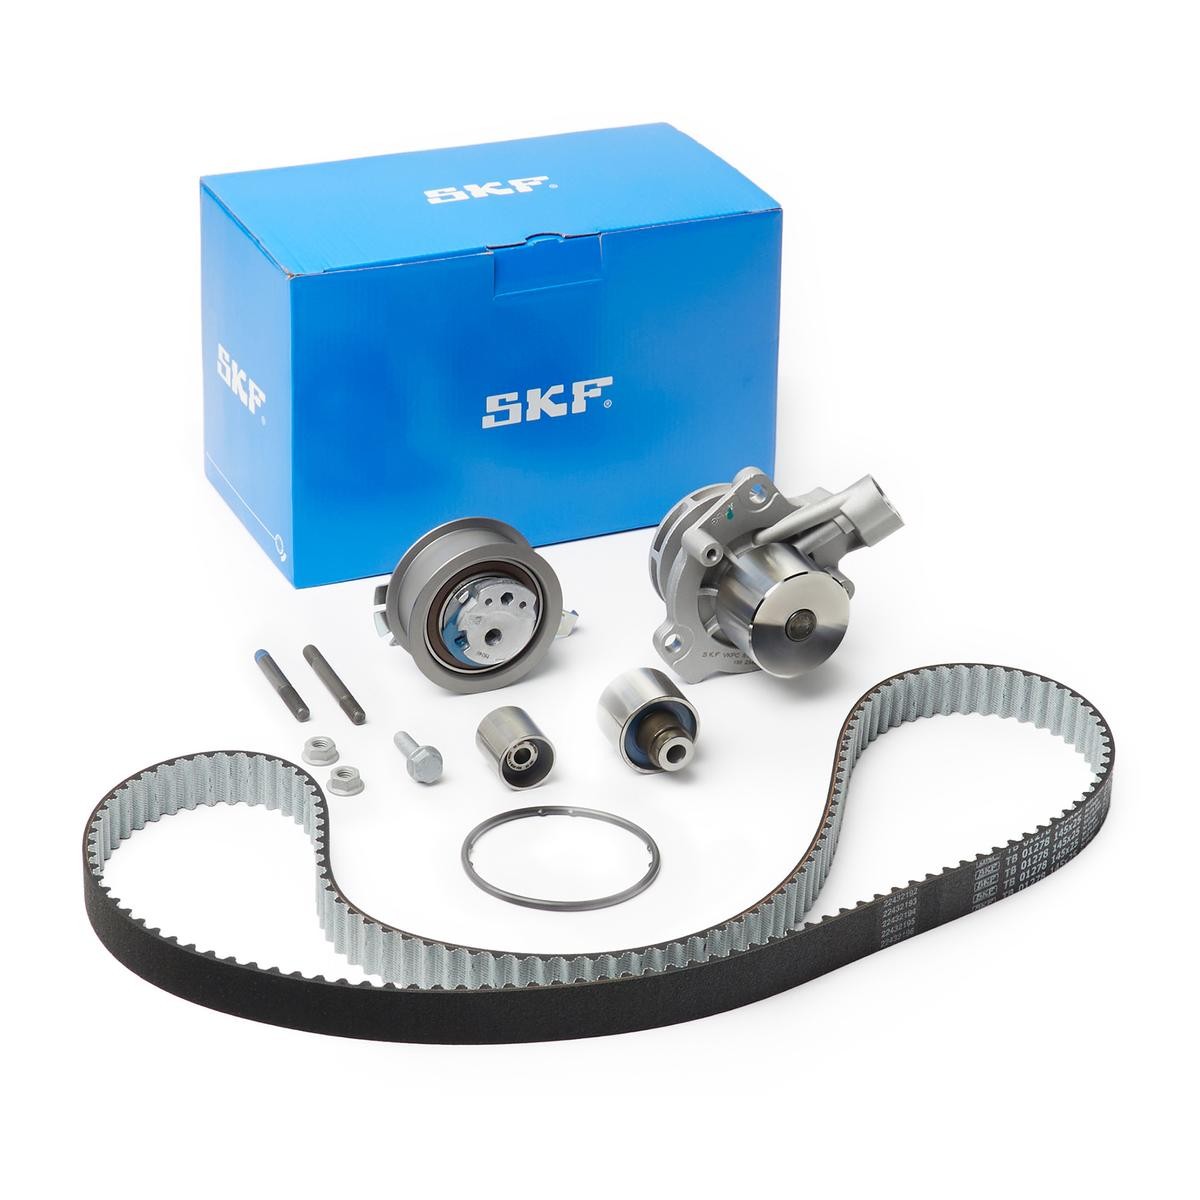 SKF VKMC 01278-1 Water pump and timing belt kit with gaskets/seals, with studs, without integrated disabling contact, non-switchable water pump, Number of Teeth: 145, for timing belt drive, Metal